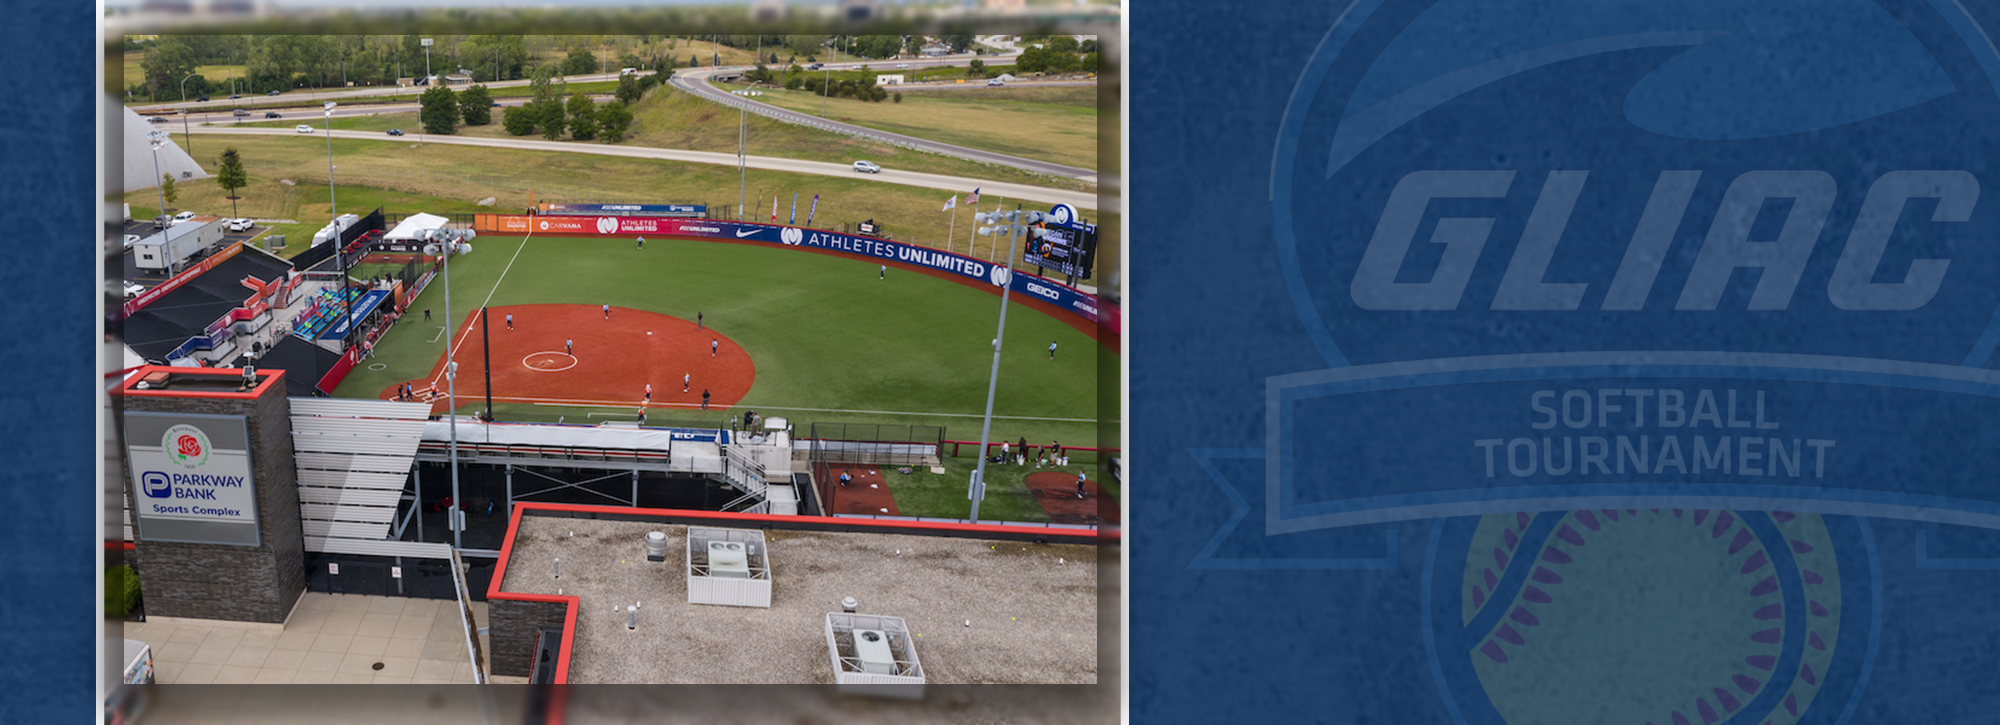 2023 GLIAC Softball Tournament to be held at The Stadium at the Parkway Bank Sports Complex